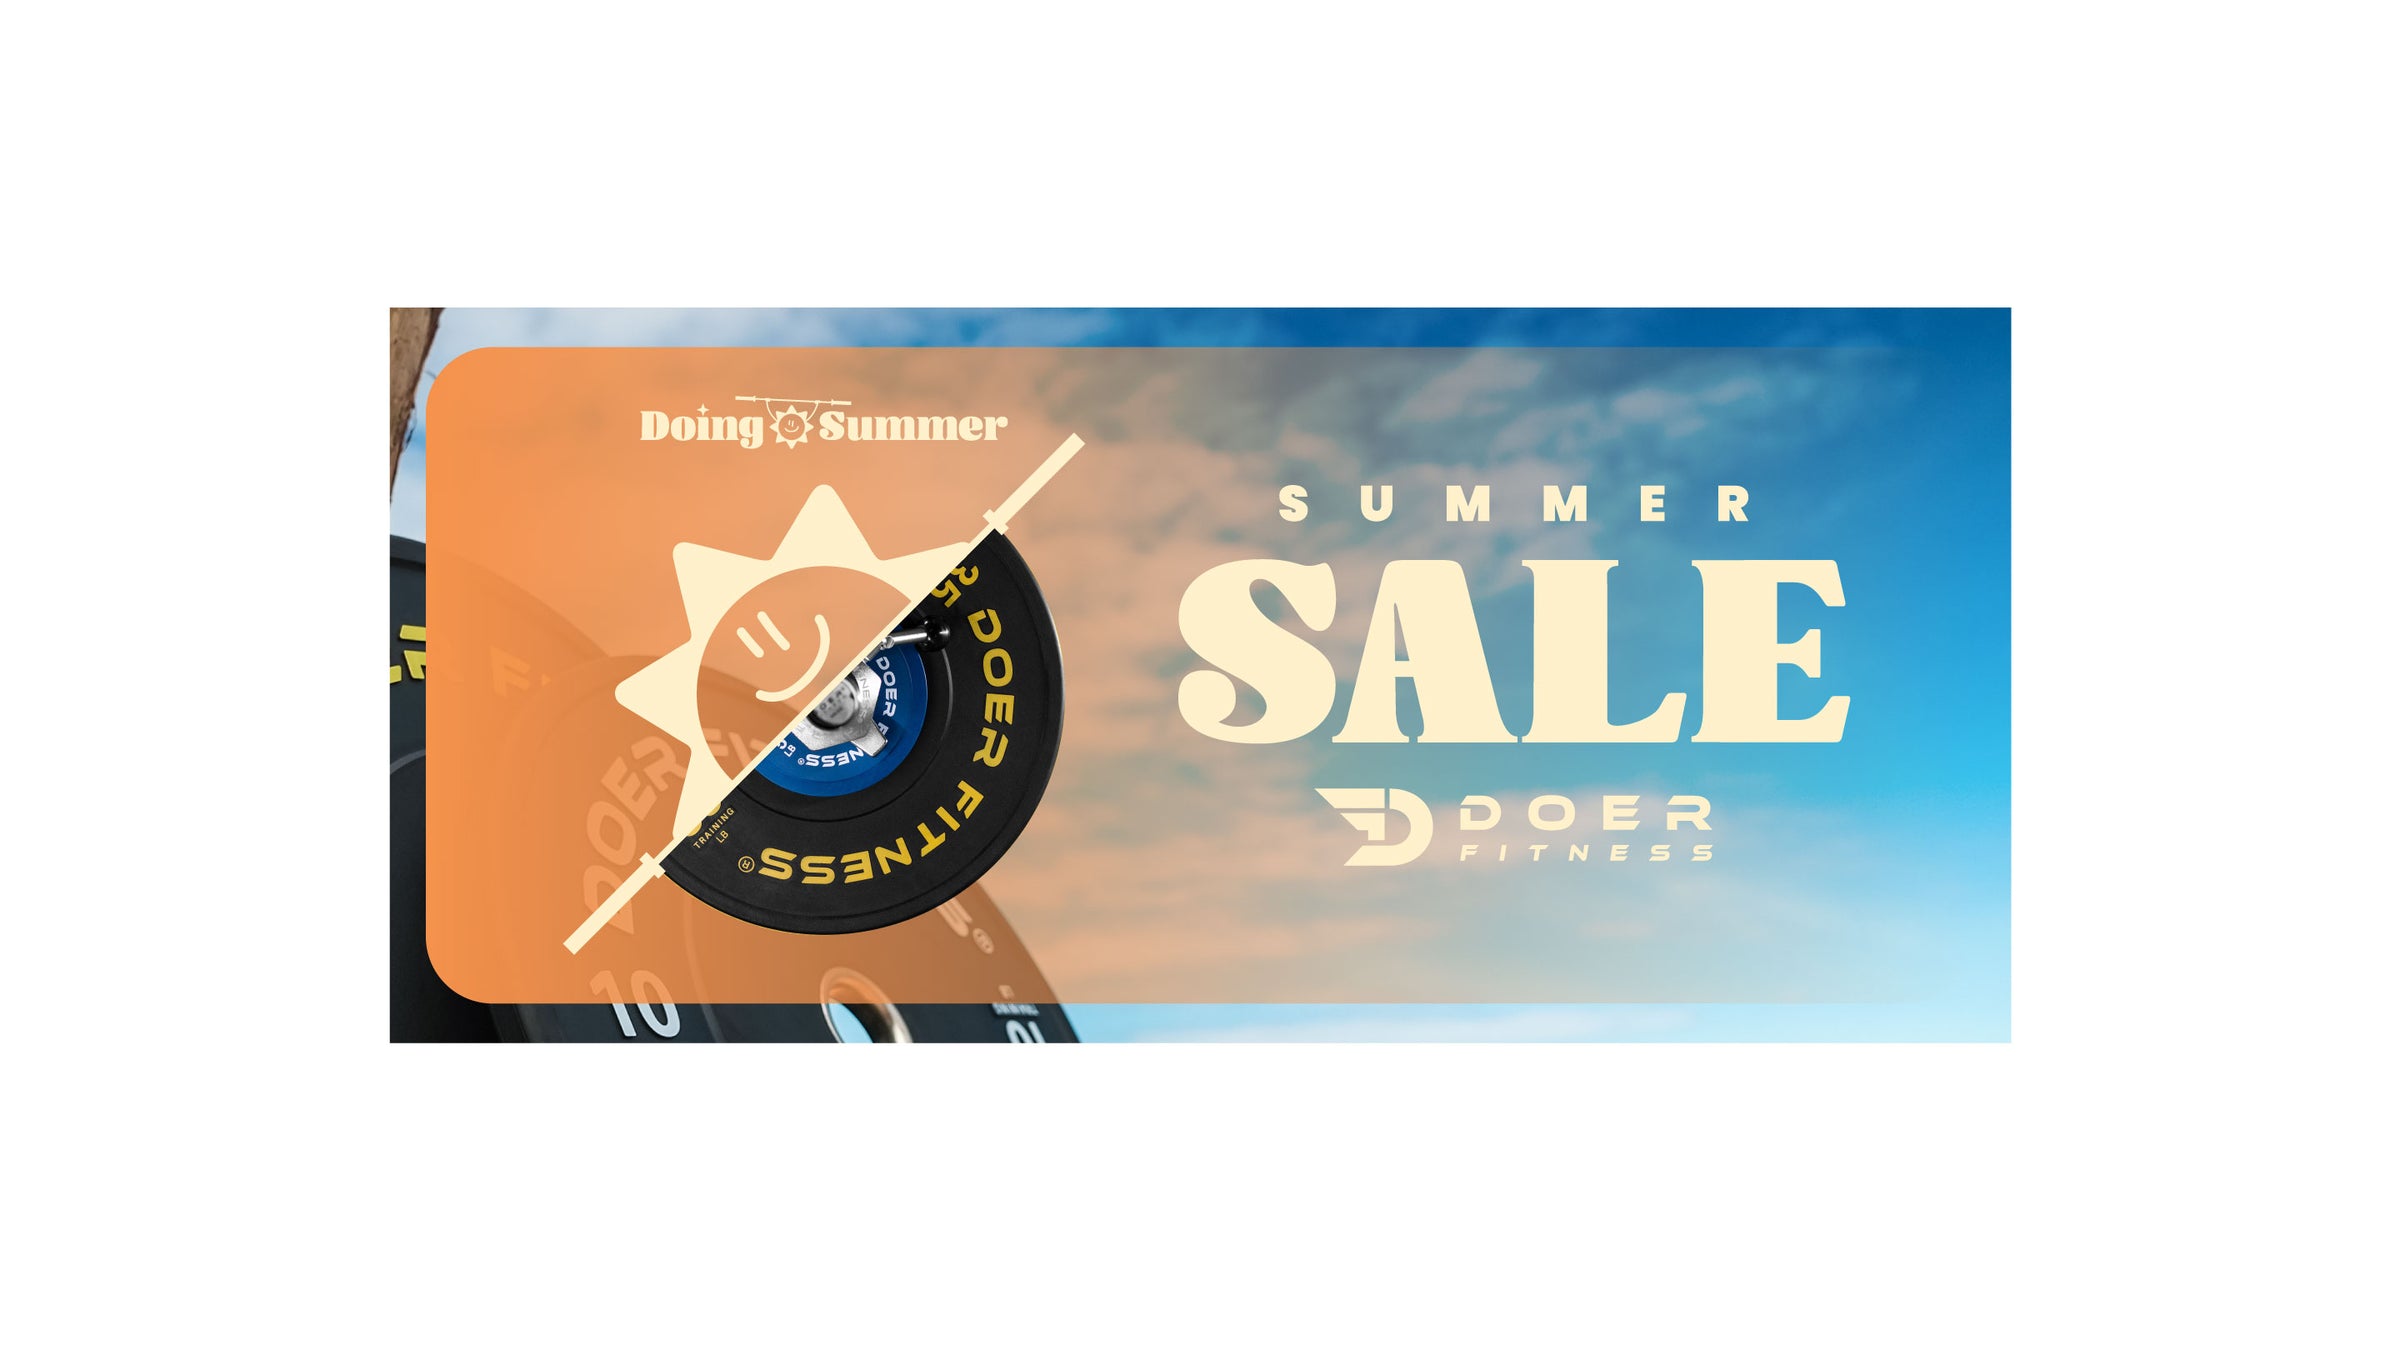 A summer sale banner featuring a barbell with a smiley face, promoting fitness equipment at DOER Fitness